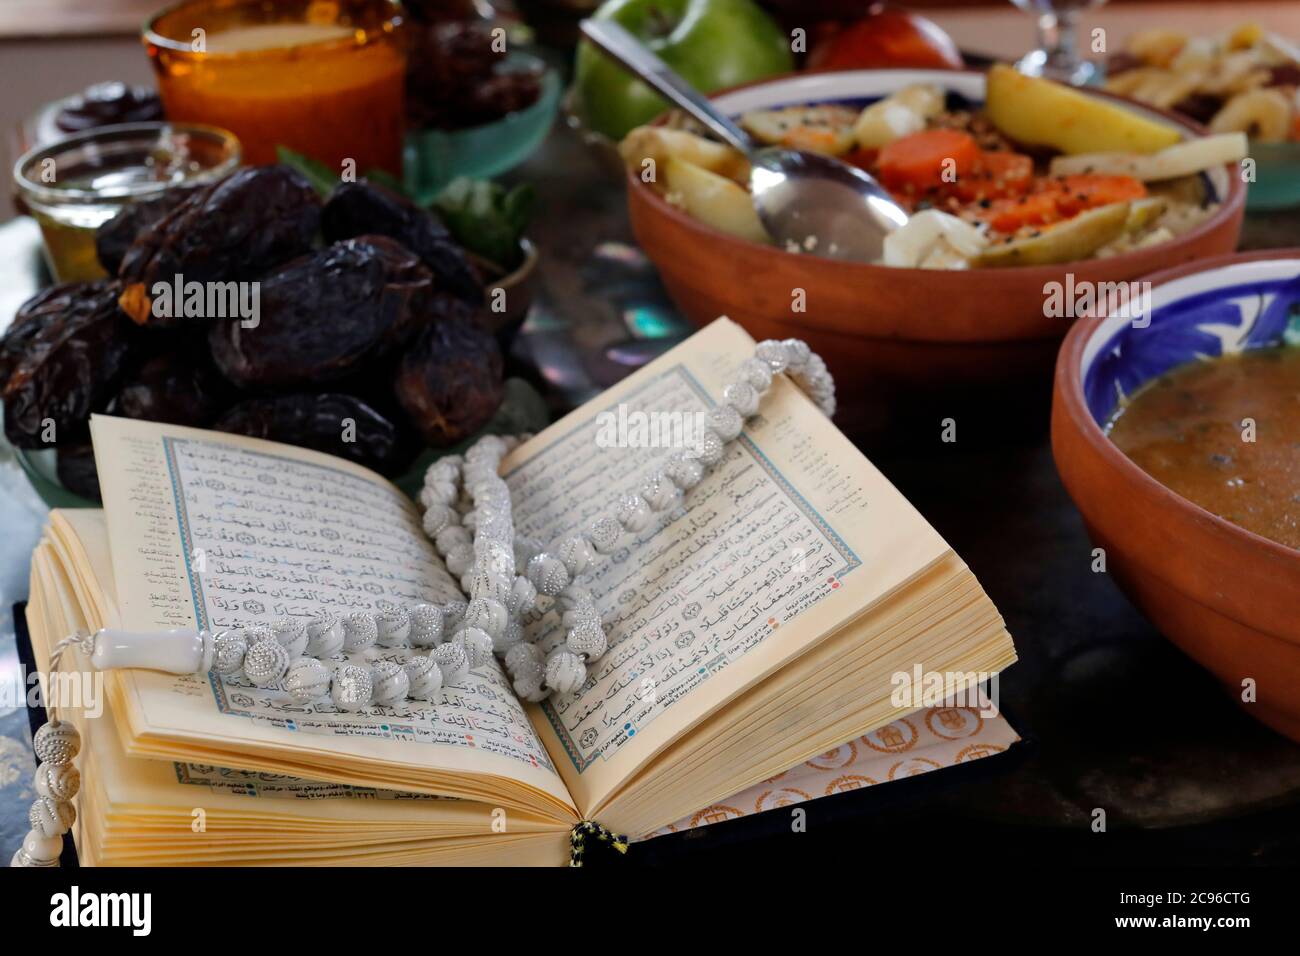 Traditional meal for iftar in time of Ramadan after the fast has been broken.  France. Stock Photo